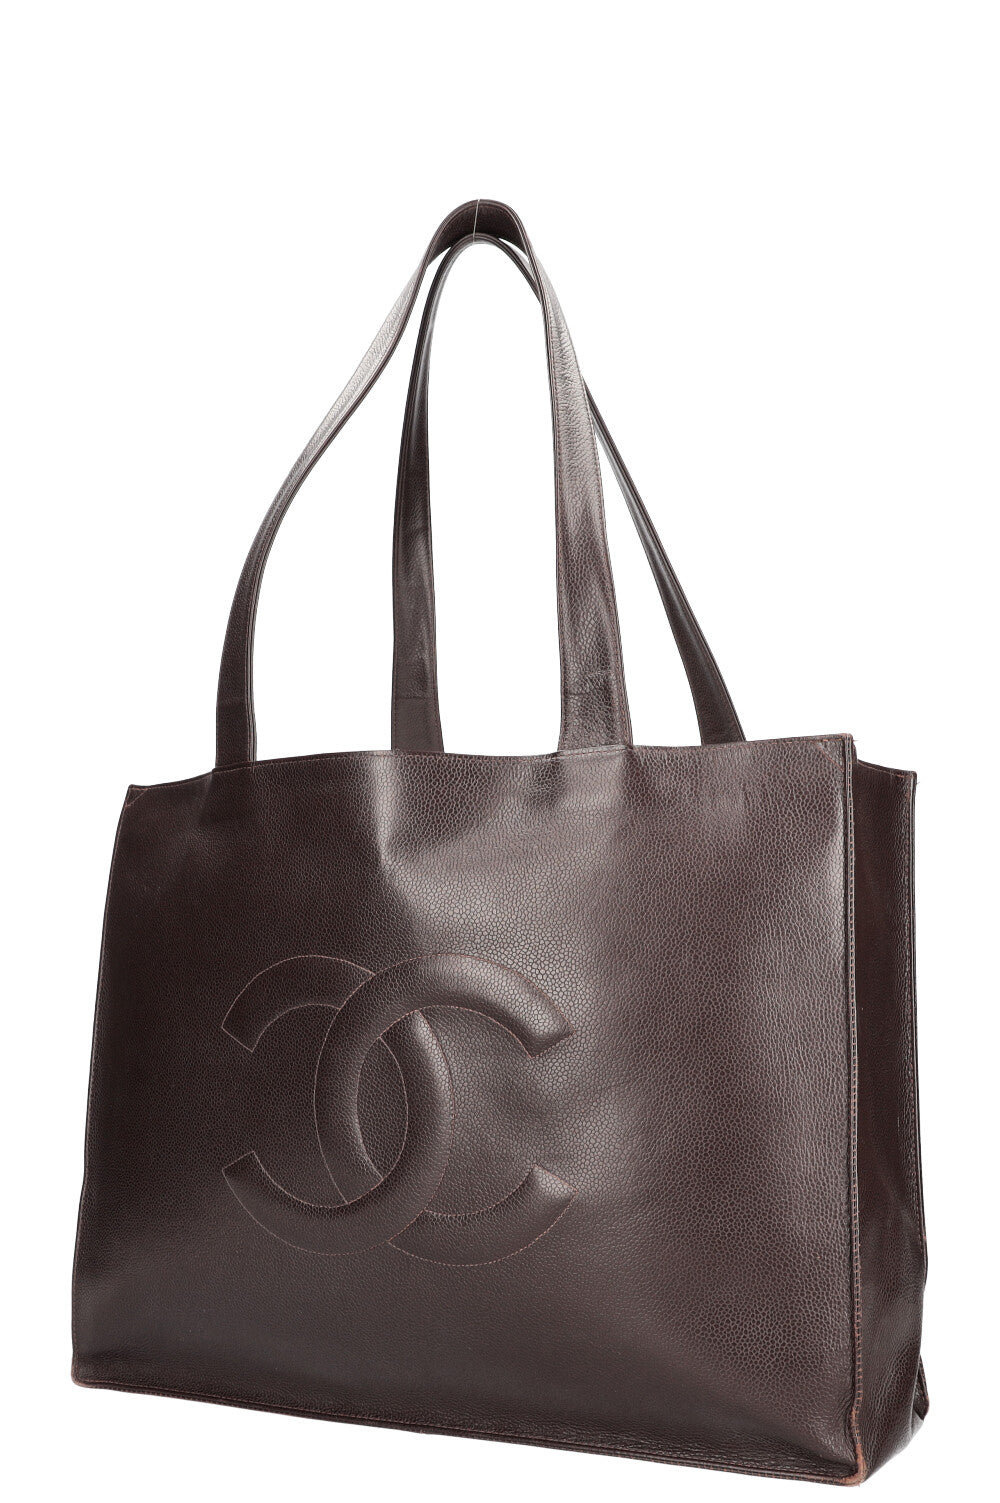 CHANEL Vintage Timeless Shopping Tote Caviar Brown